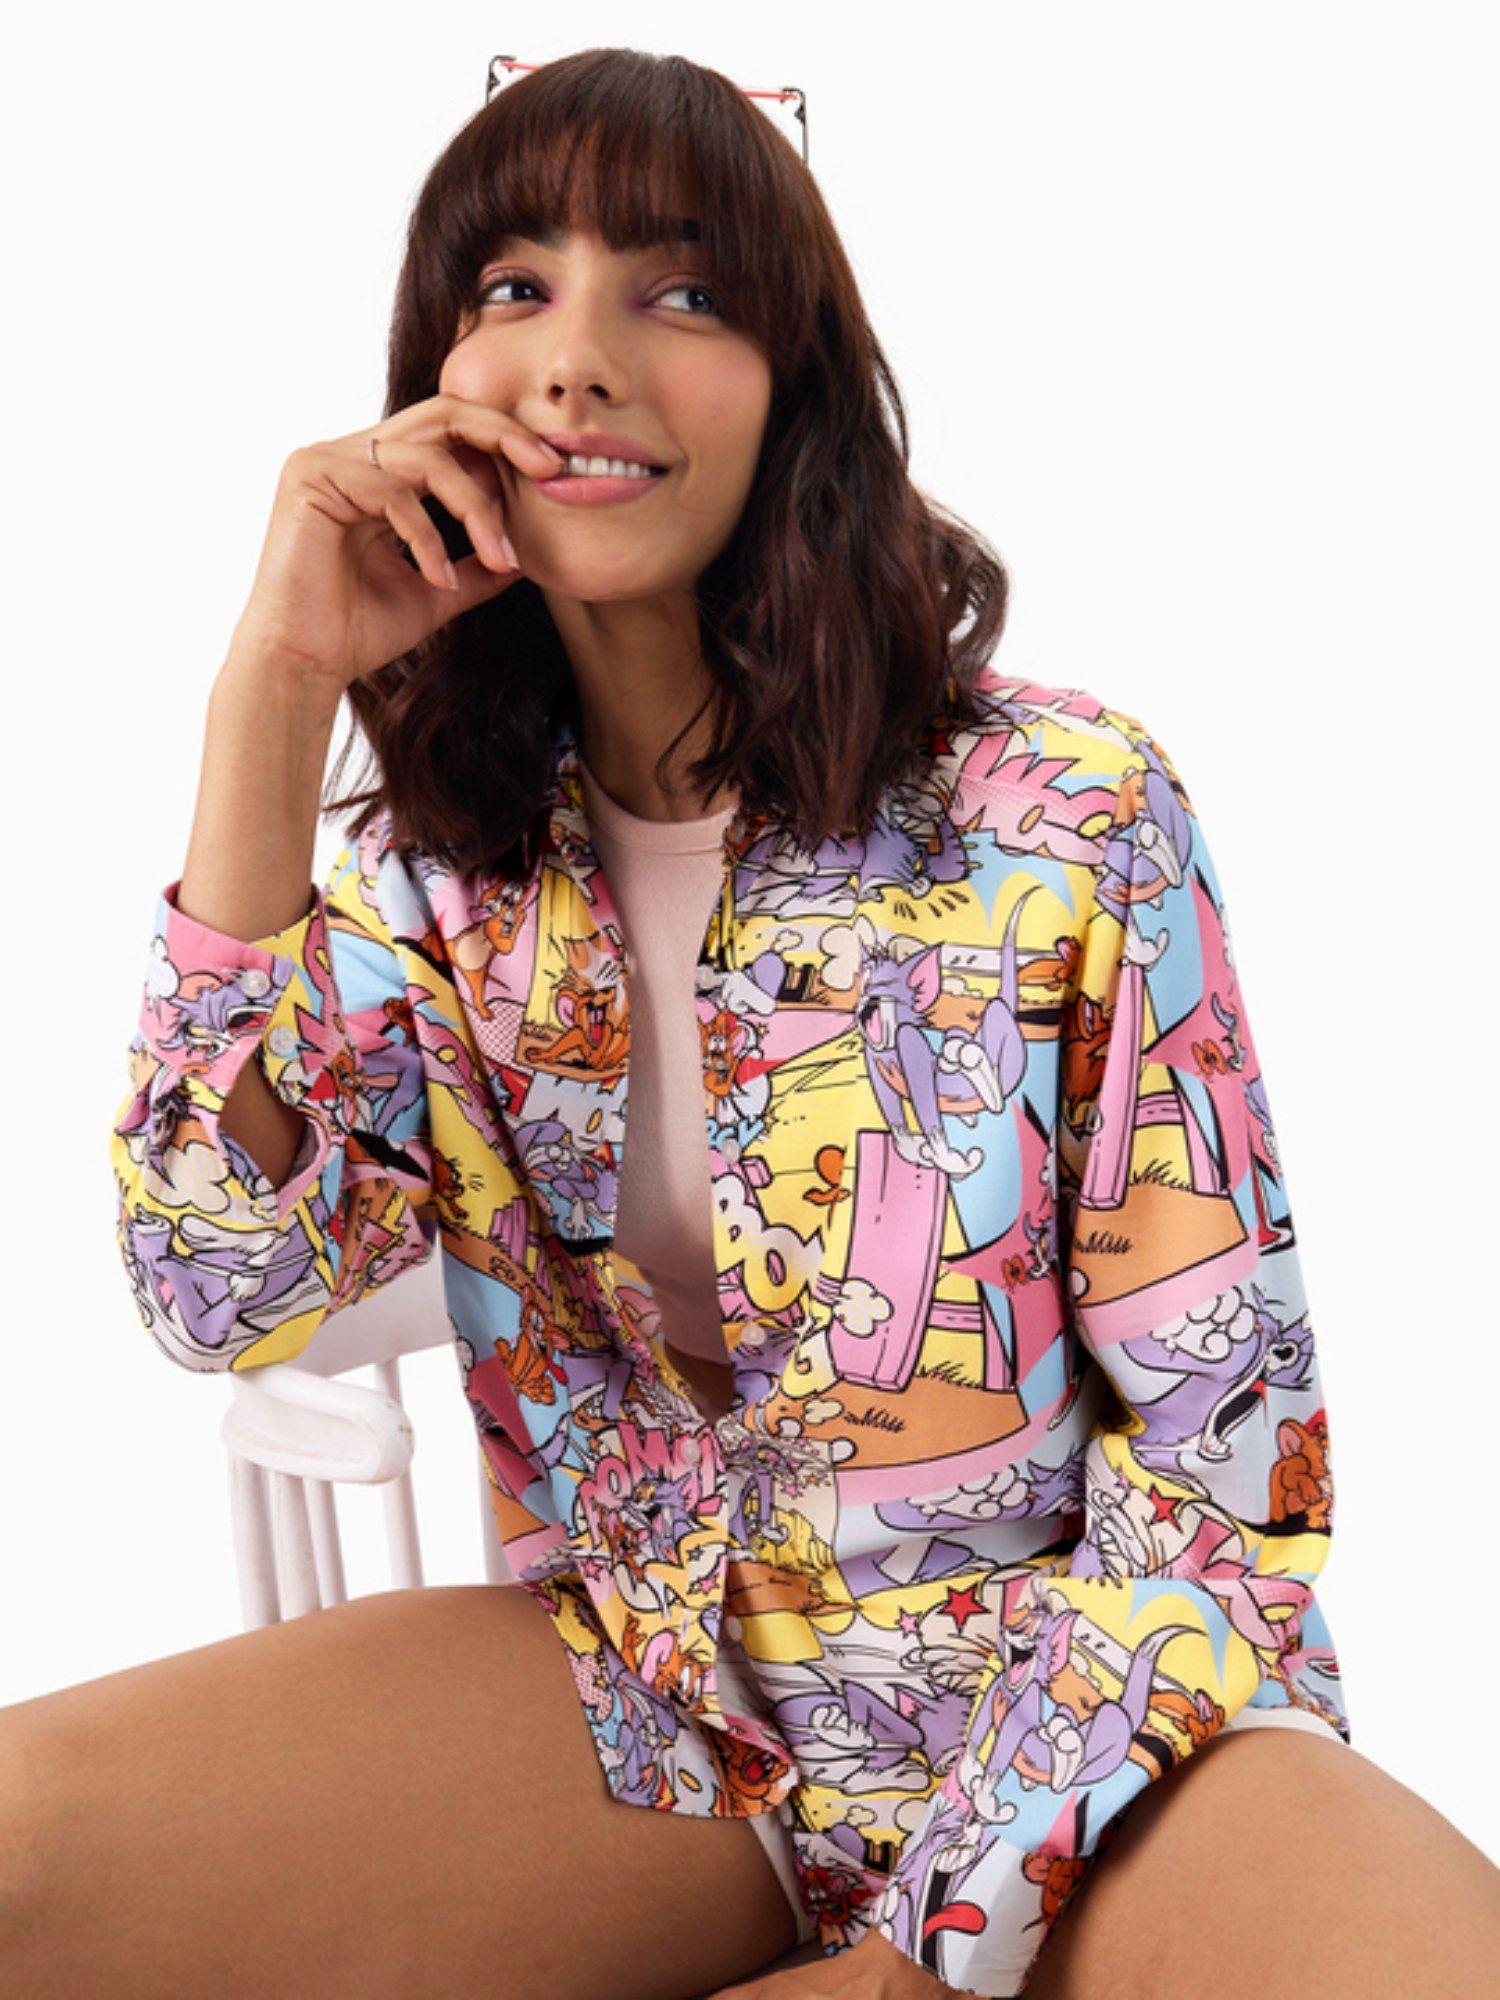 official tom & jerry: high energy women oversized shirts